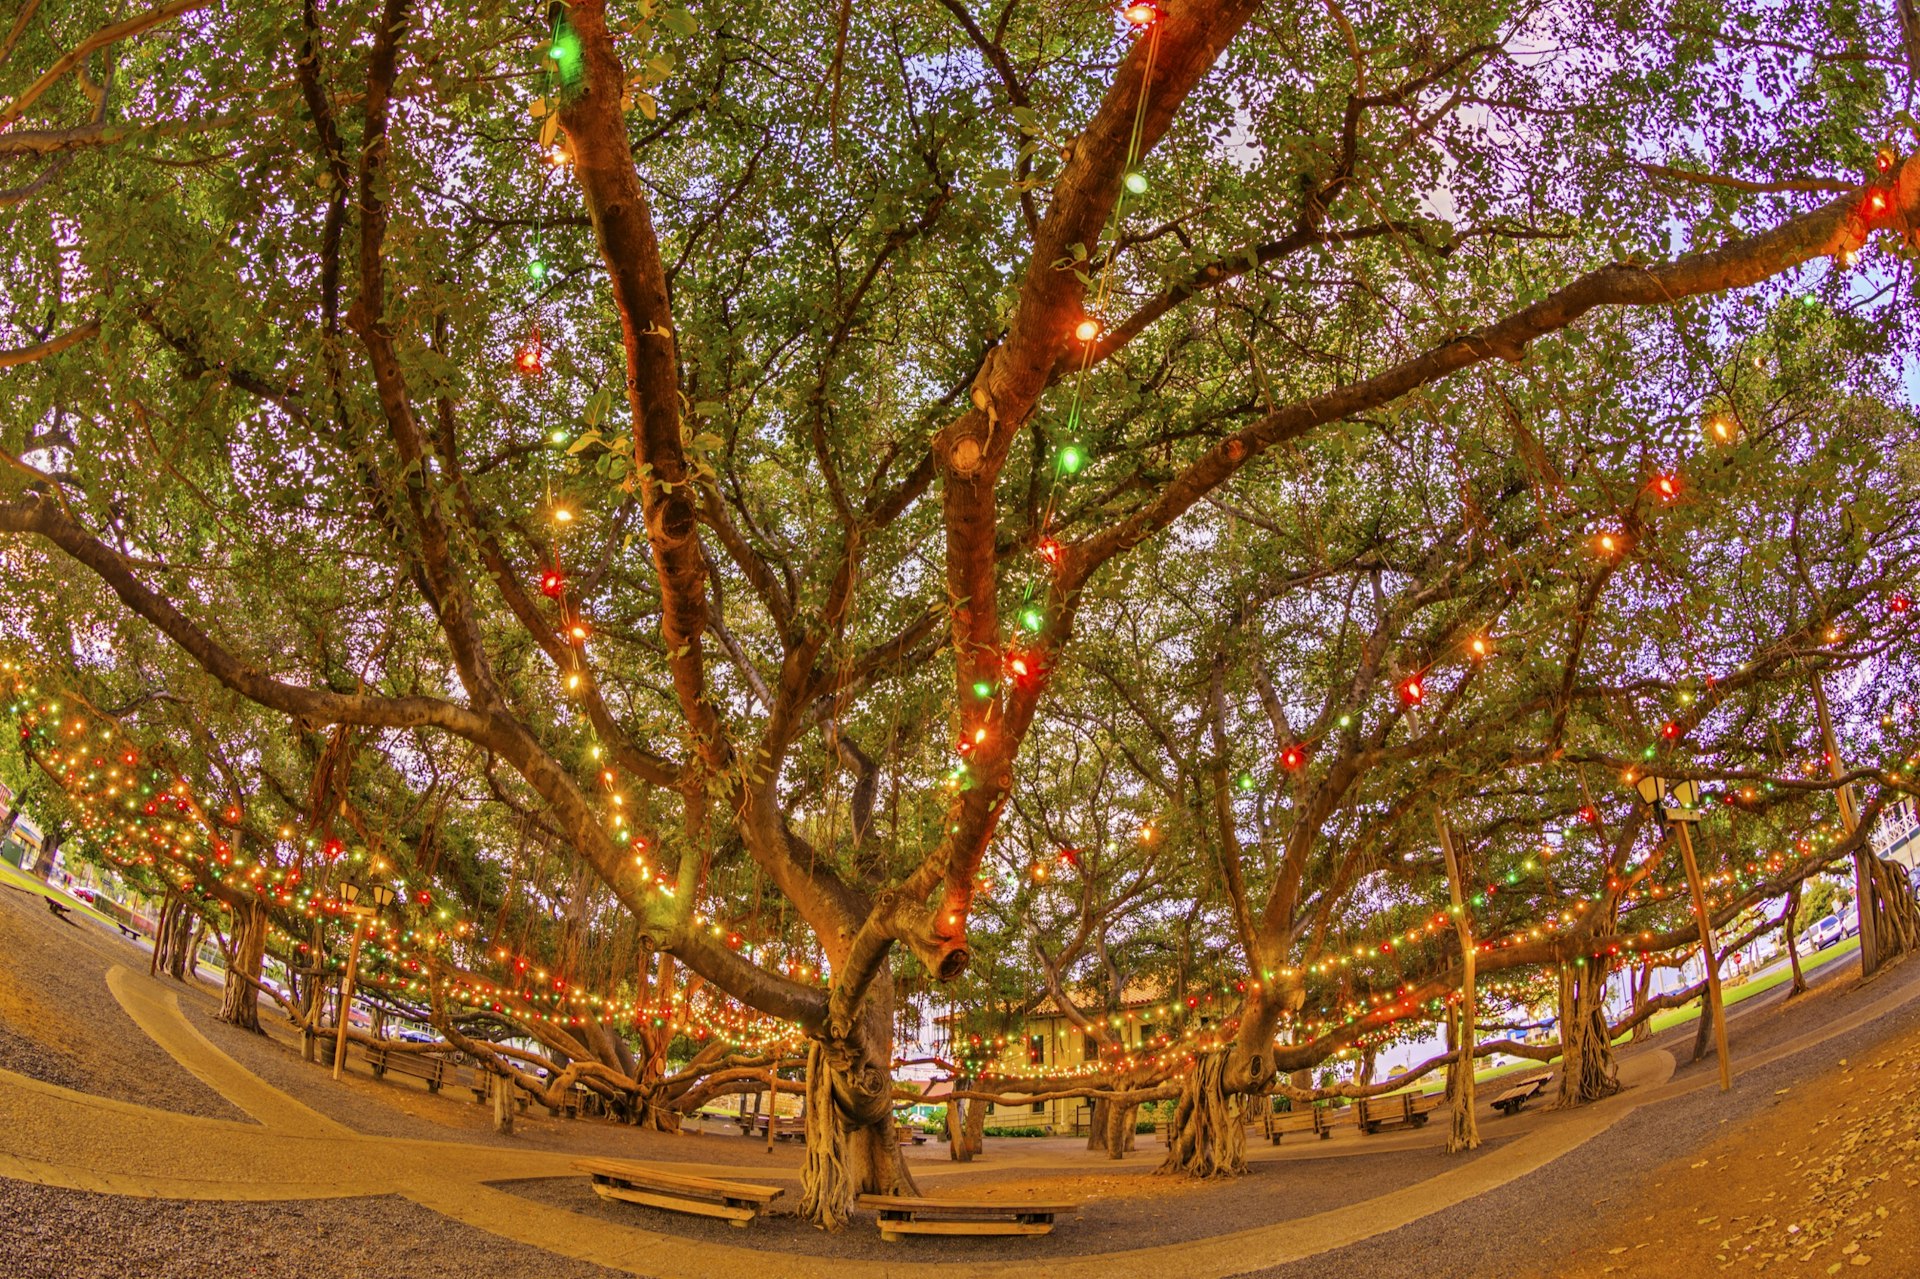 A banyan tree decorated in colourful Christmas lights